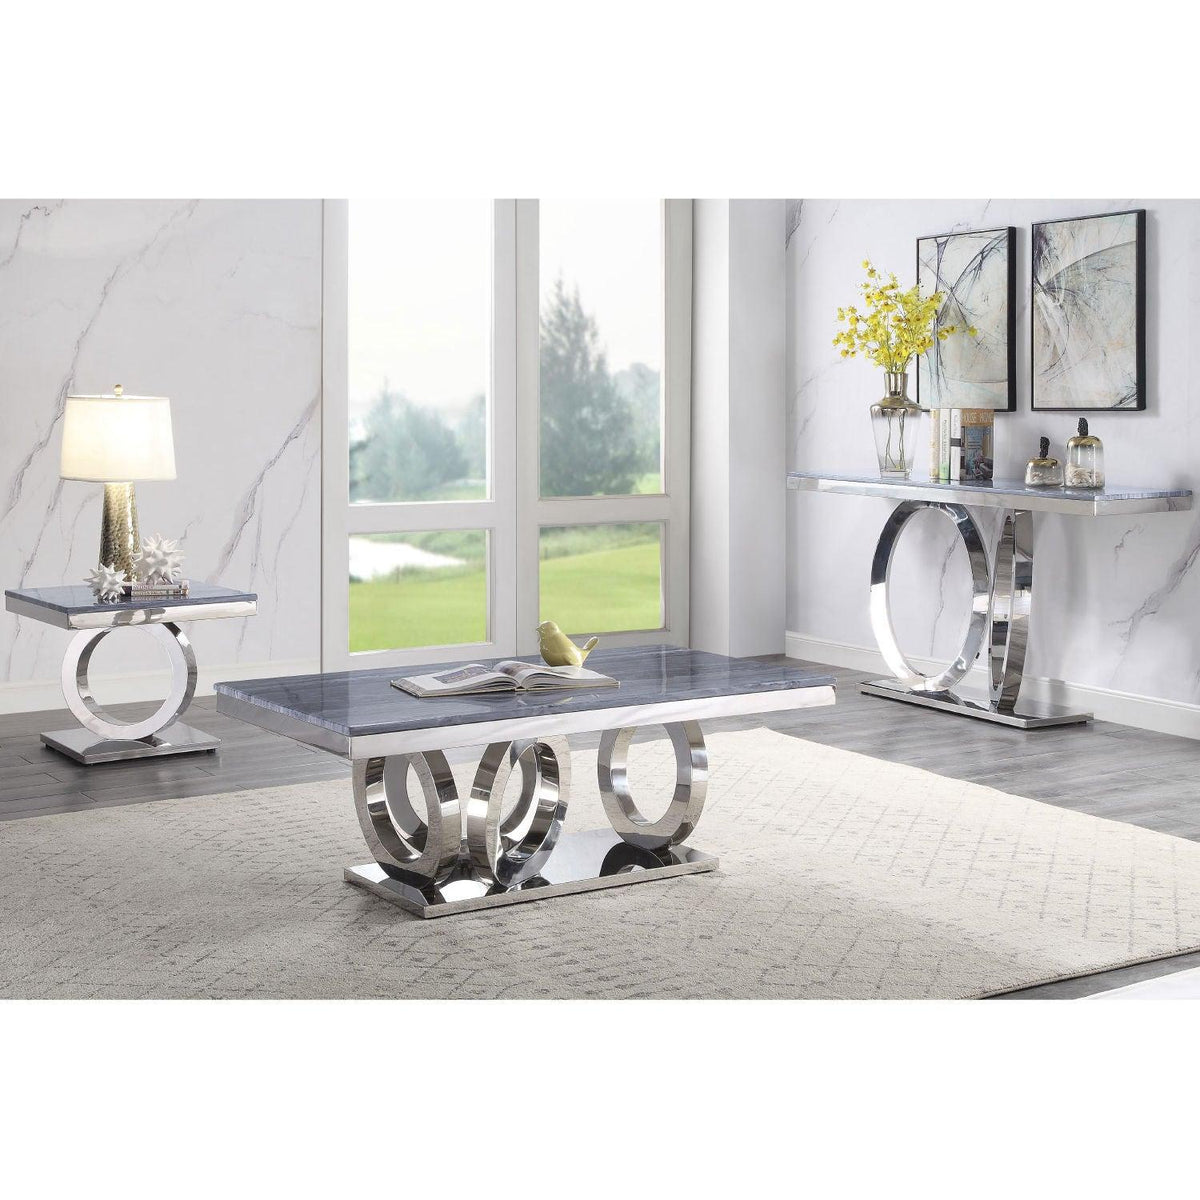 Zasir Gray Printed Faux Marble & Mirrored Silver Finish Table Set  Half Price Furniture